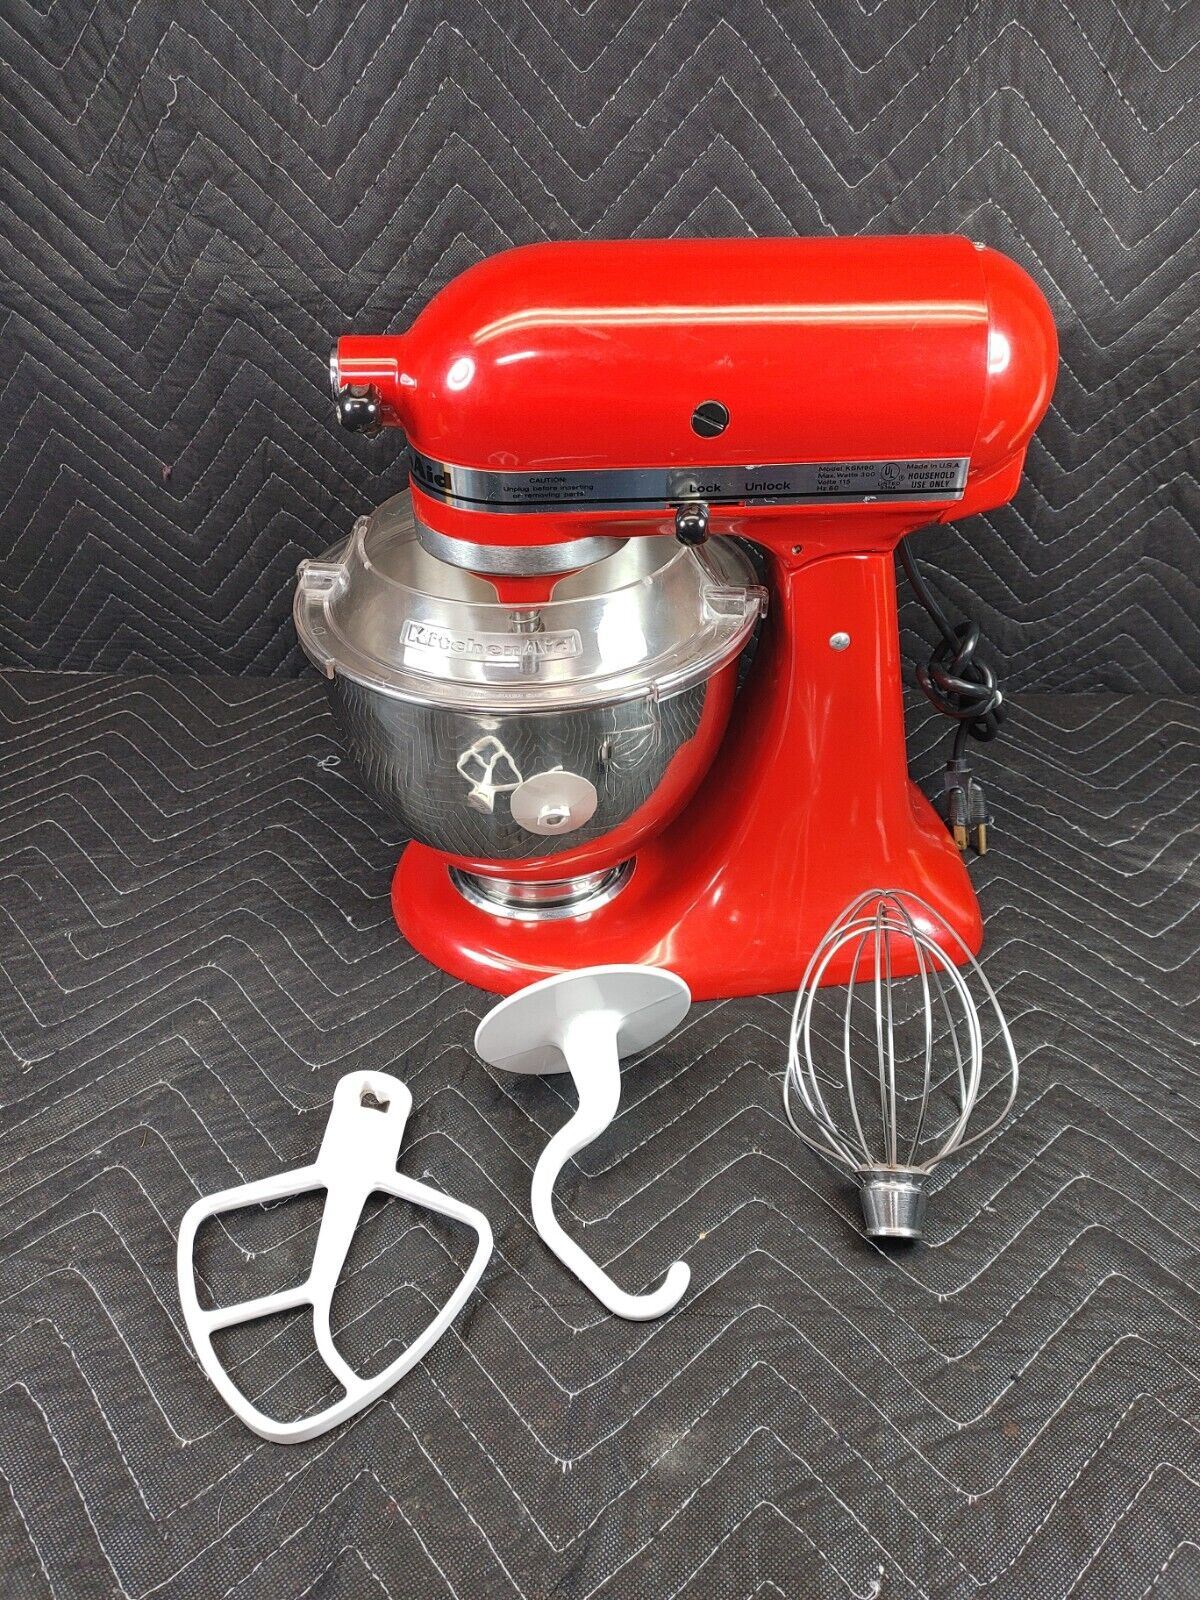 KitchenAid KSM90 300W Ultra Power Stand Mixer 10 SPEED, Made in USA